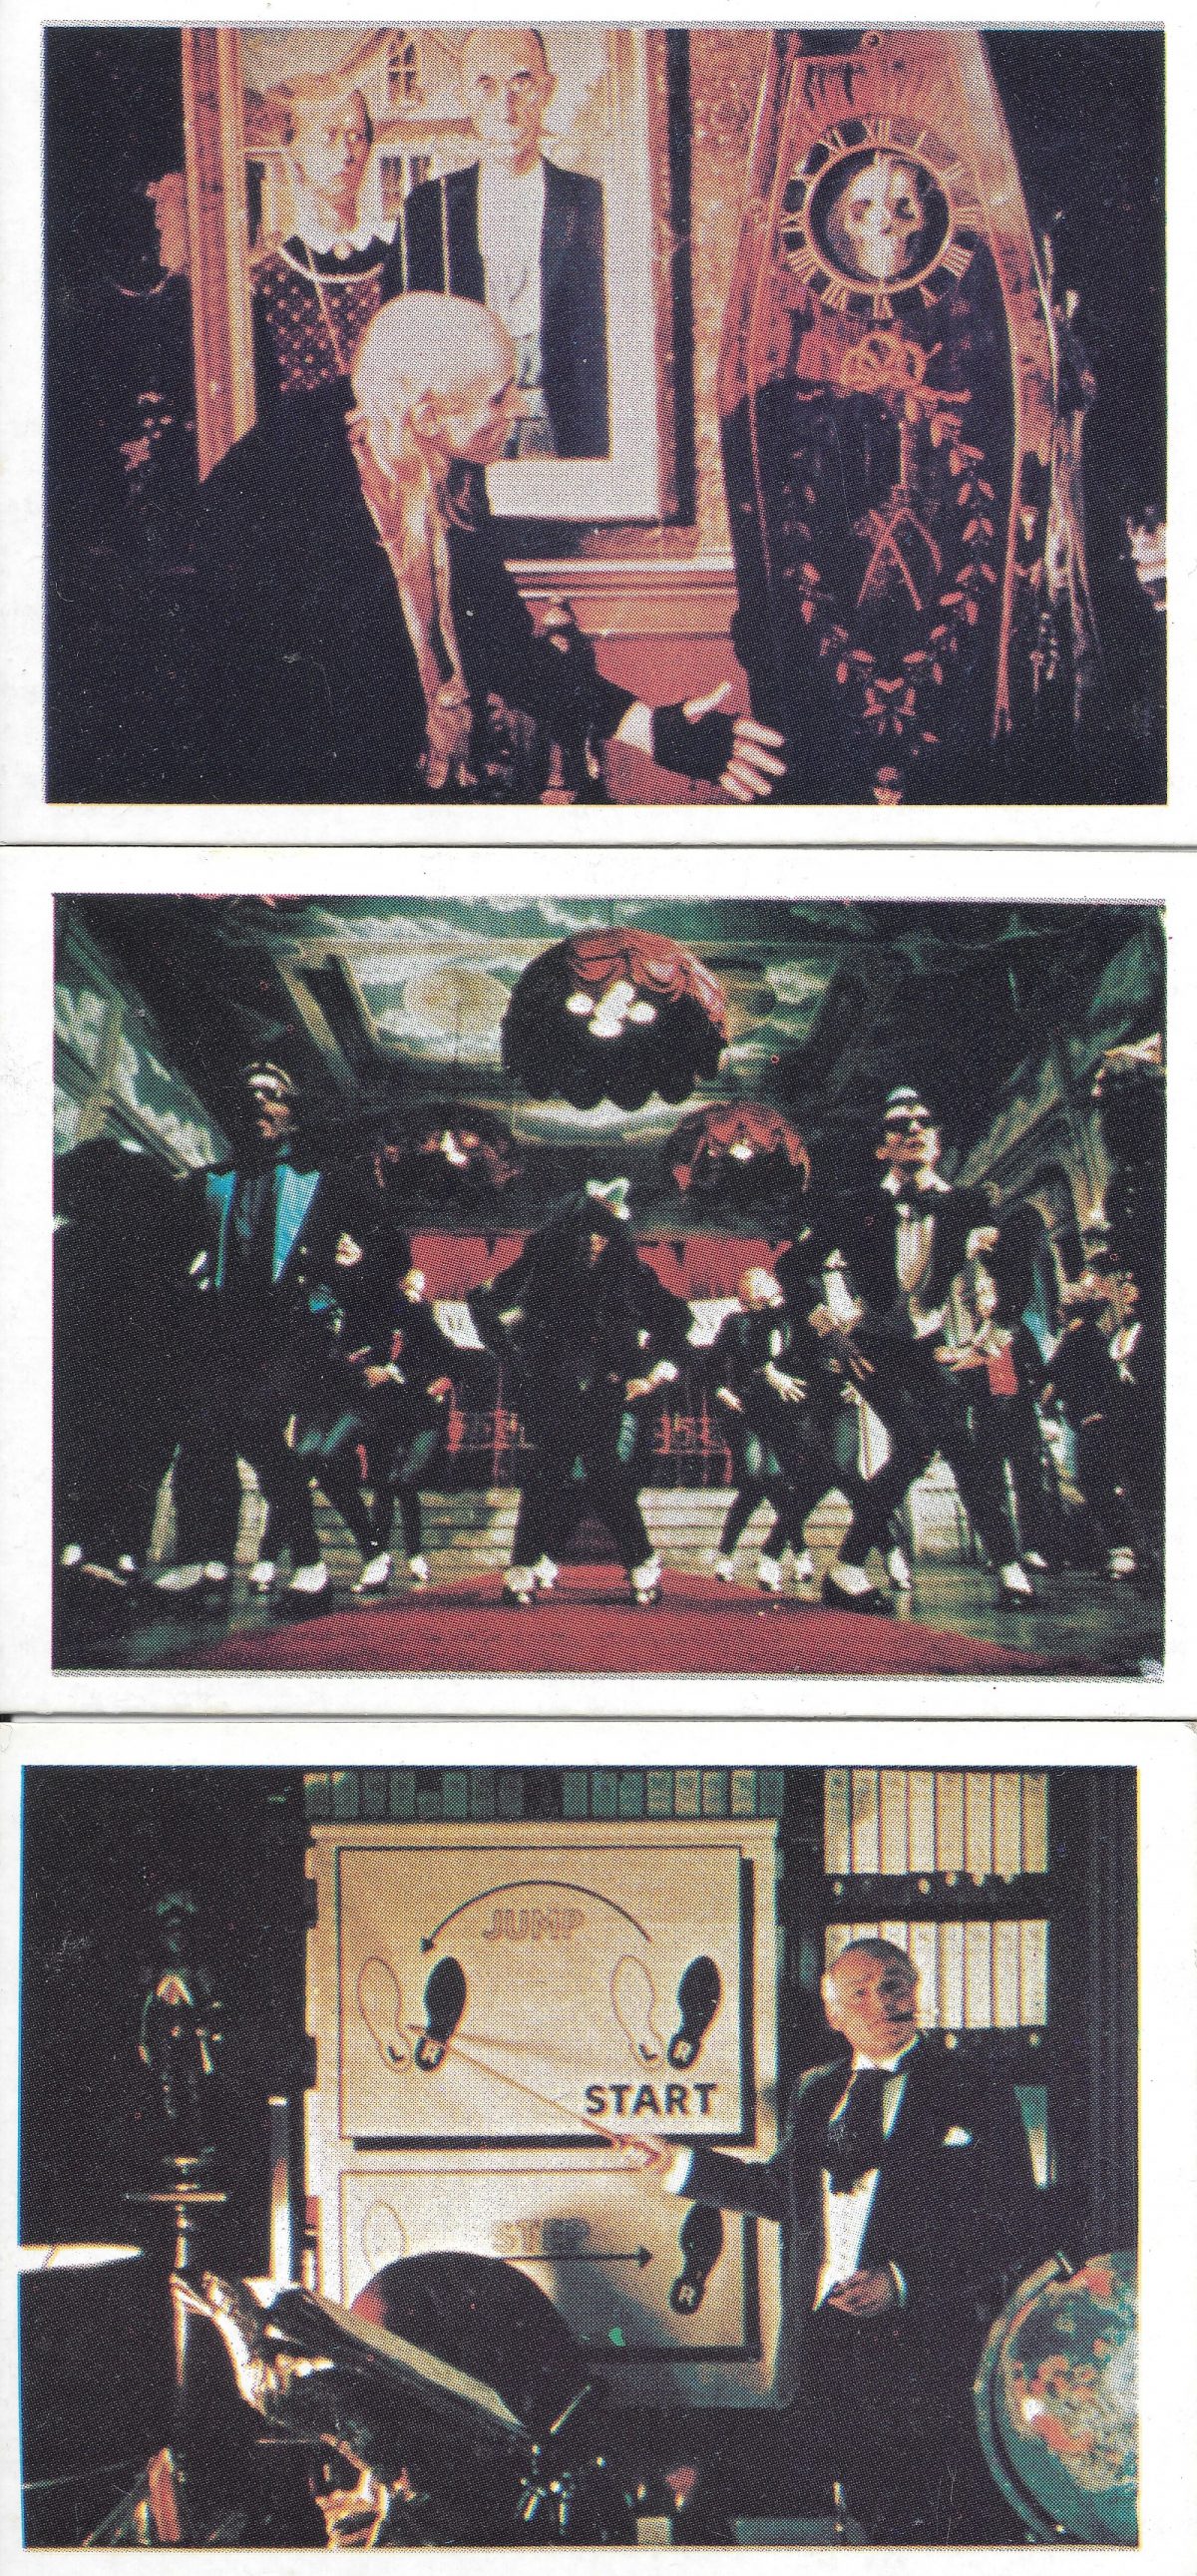 Rocky Horror Picture Show, trading cards, film, 